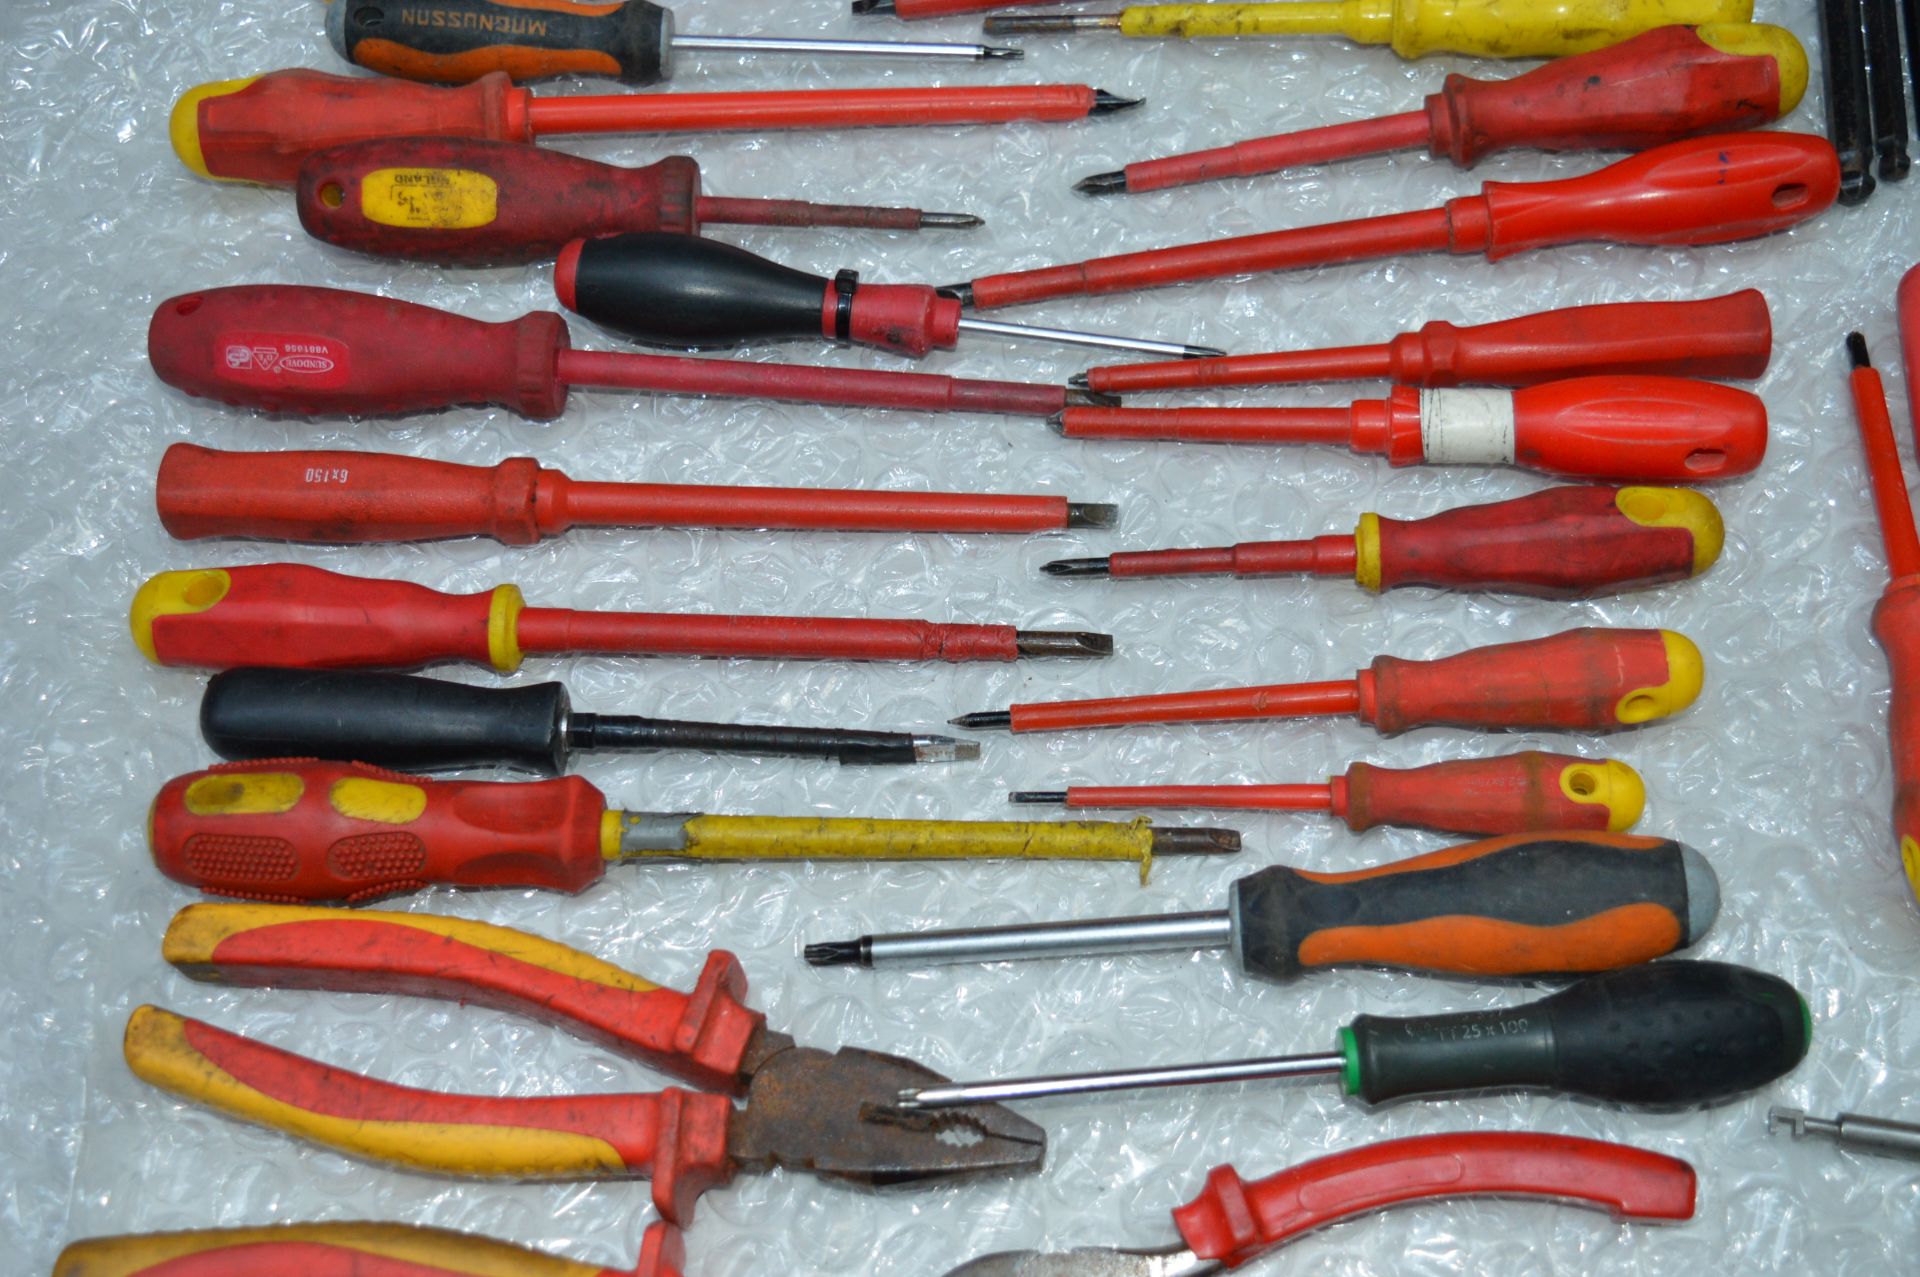 68 x Various Hand Tools Iincluding Screwdrivers, Saws, Allen Keys, Plyers and More - Please See - Image 8 of 9